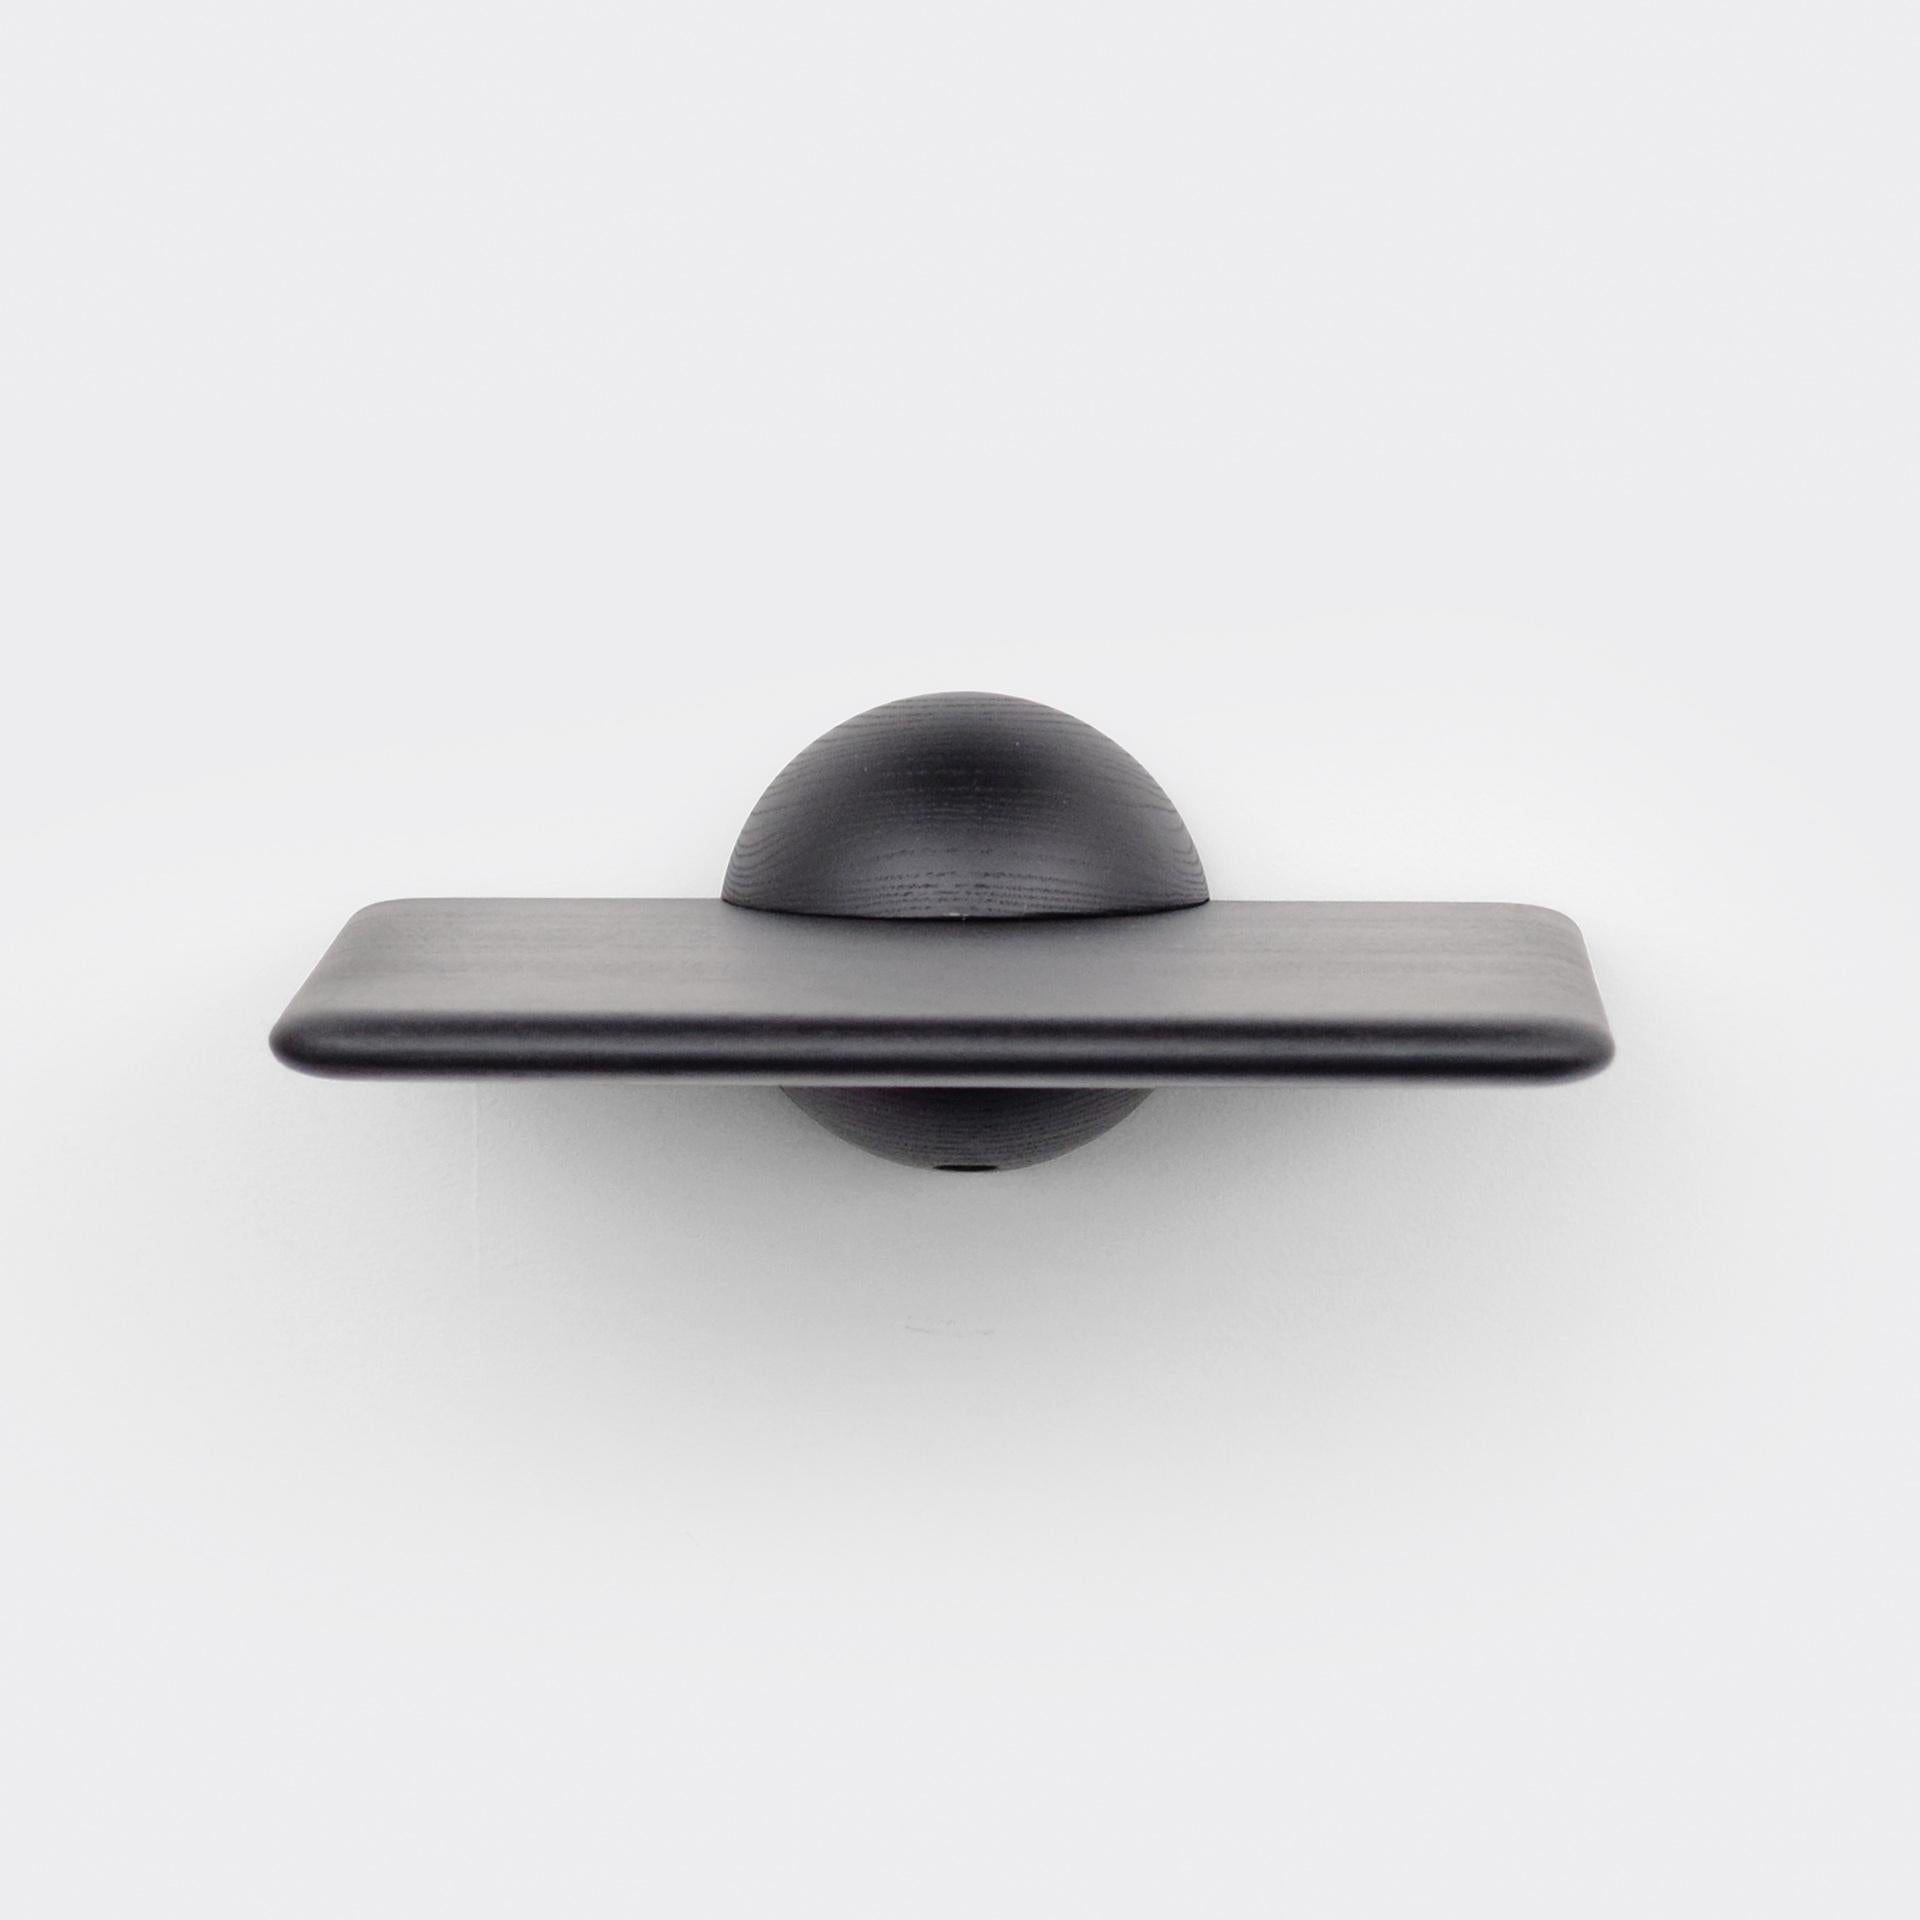 The half sphere holding the plane contributes to a bold yet minimal look that works well in several different spaces and environments. Whether used as a shelf for an extraordinary object, as a bedside table or as a small bar table it's present with